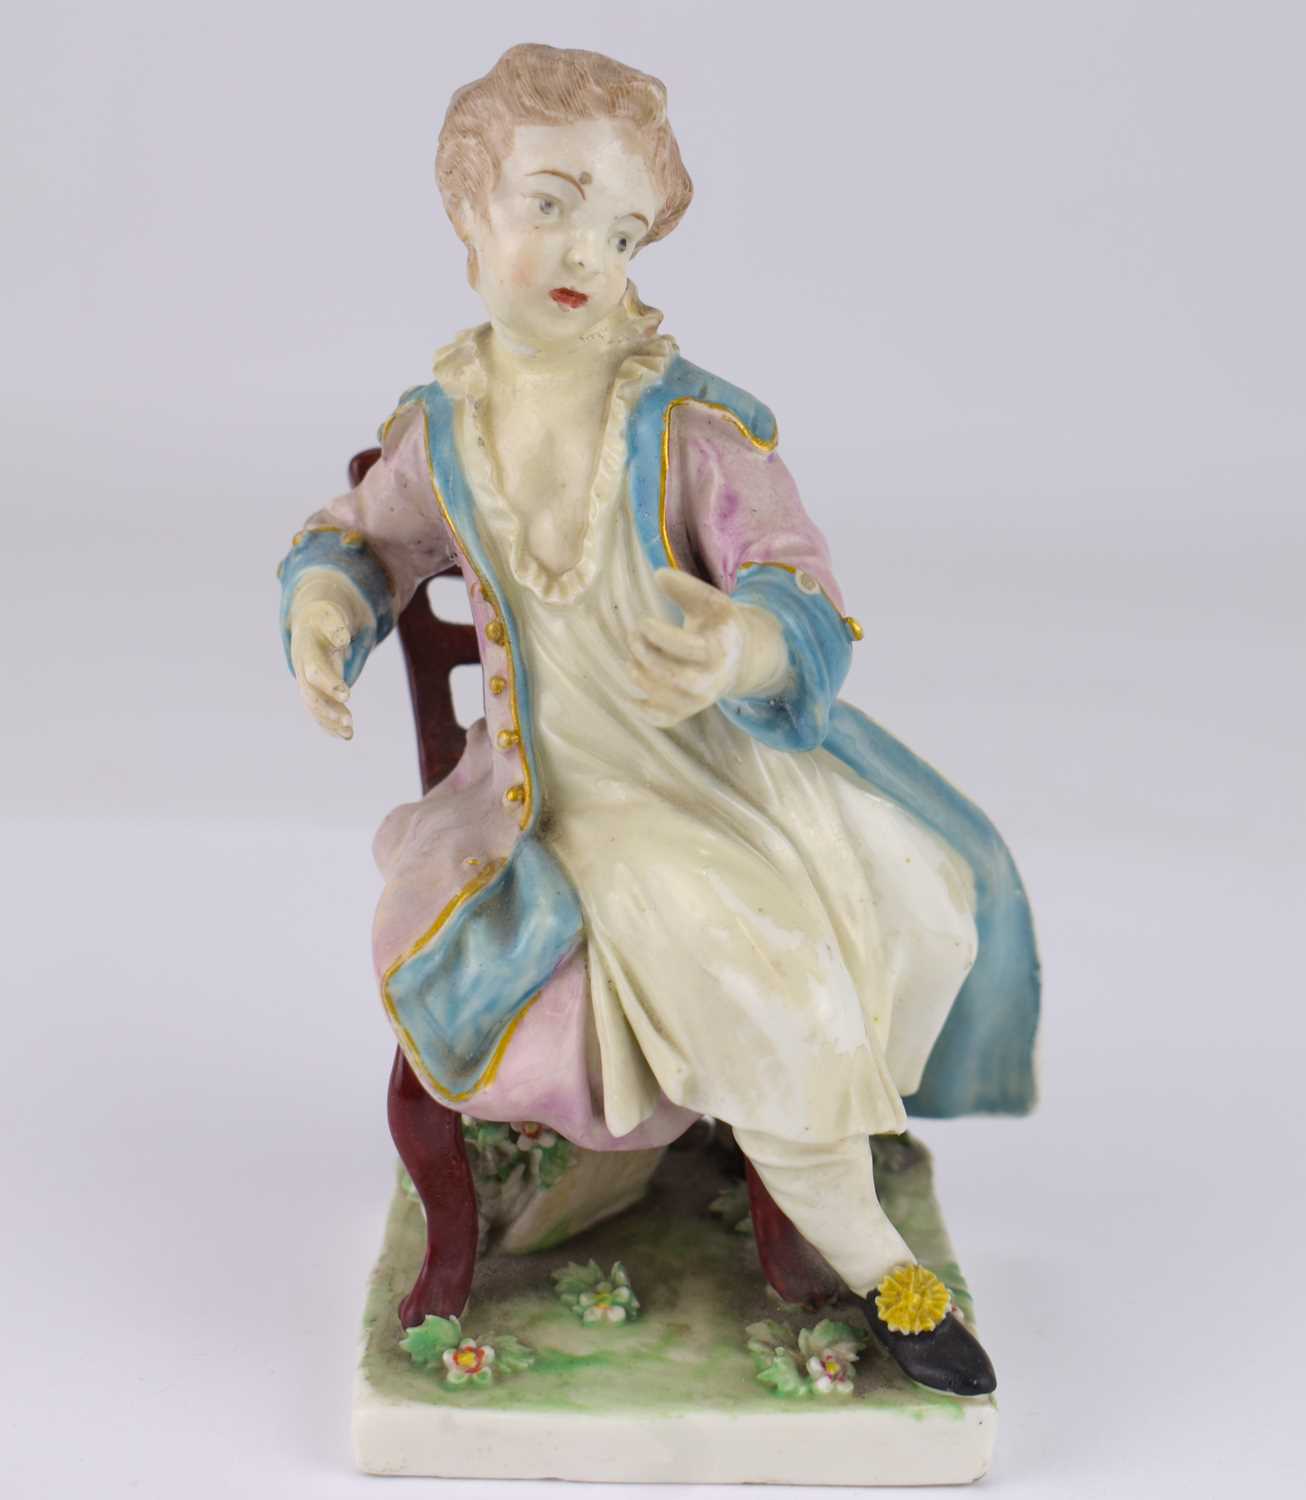 DERBY; an 18th century porcelain figure depicting a boy with coat, sat on a chair, height 14.5cm, on